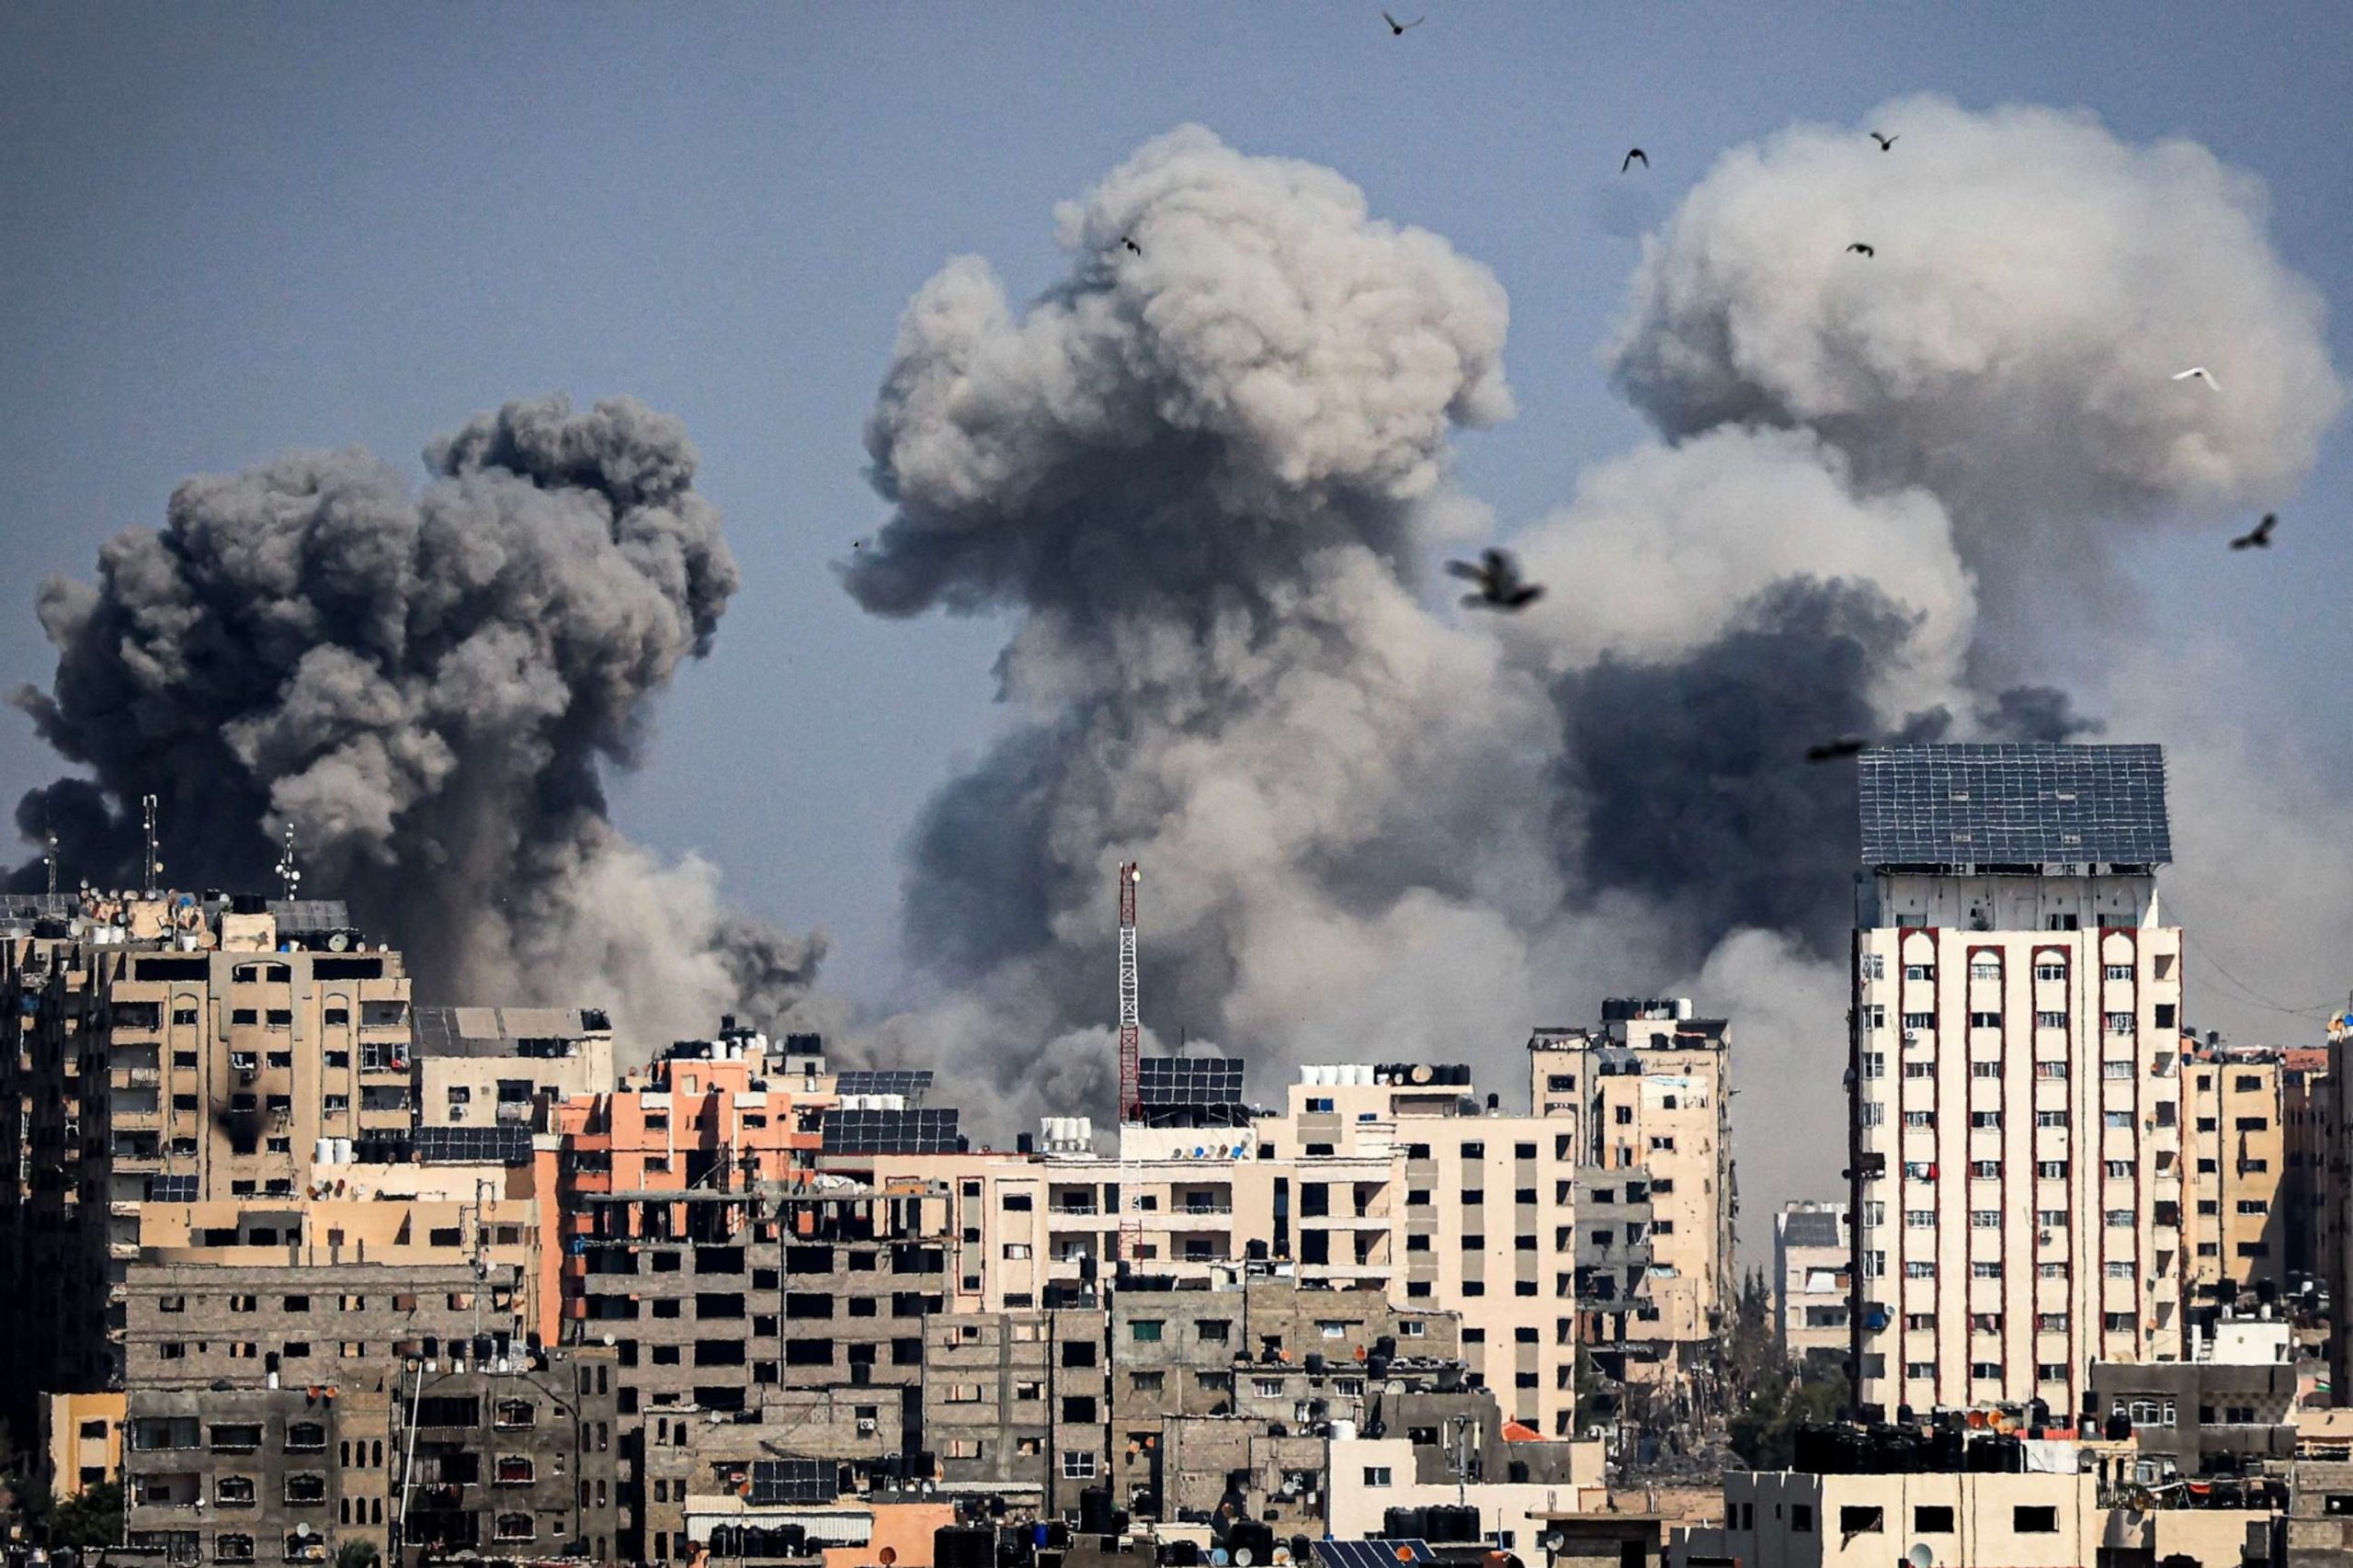 Americans share their experiences of confusion and frustration while attempting to escape Gaza